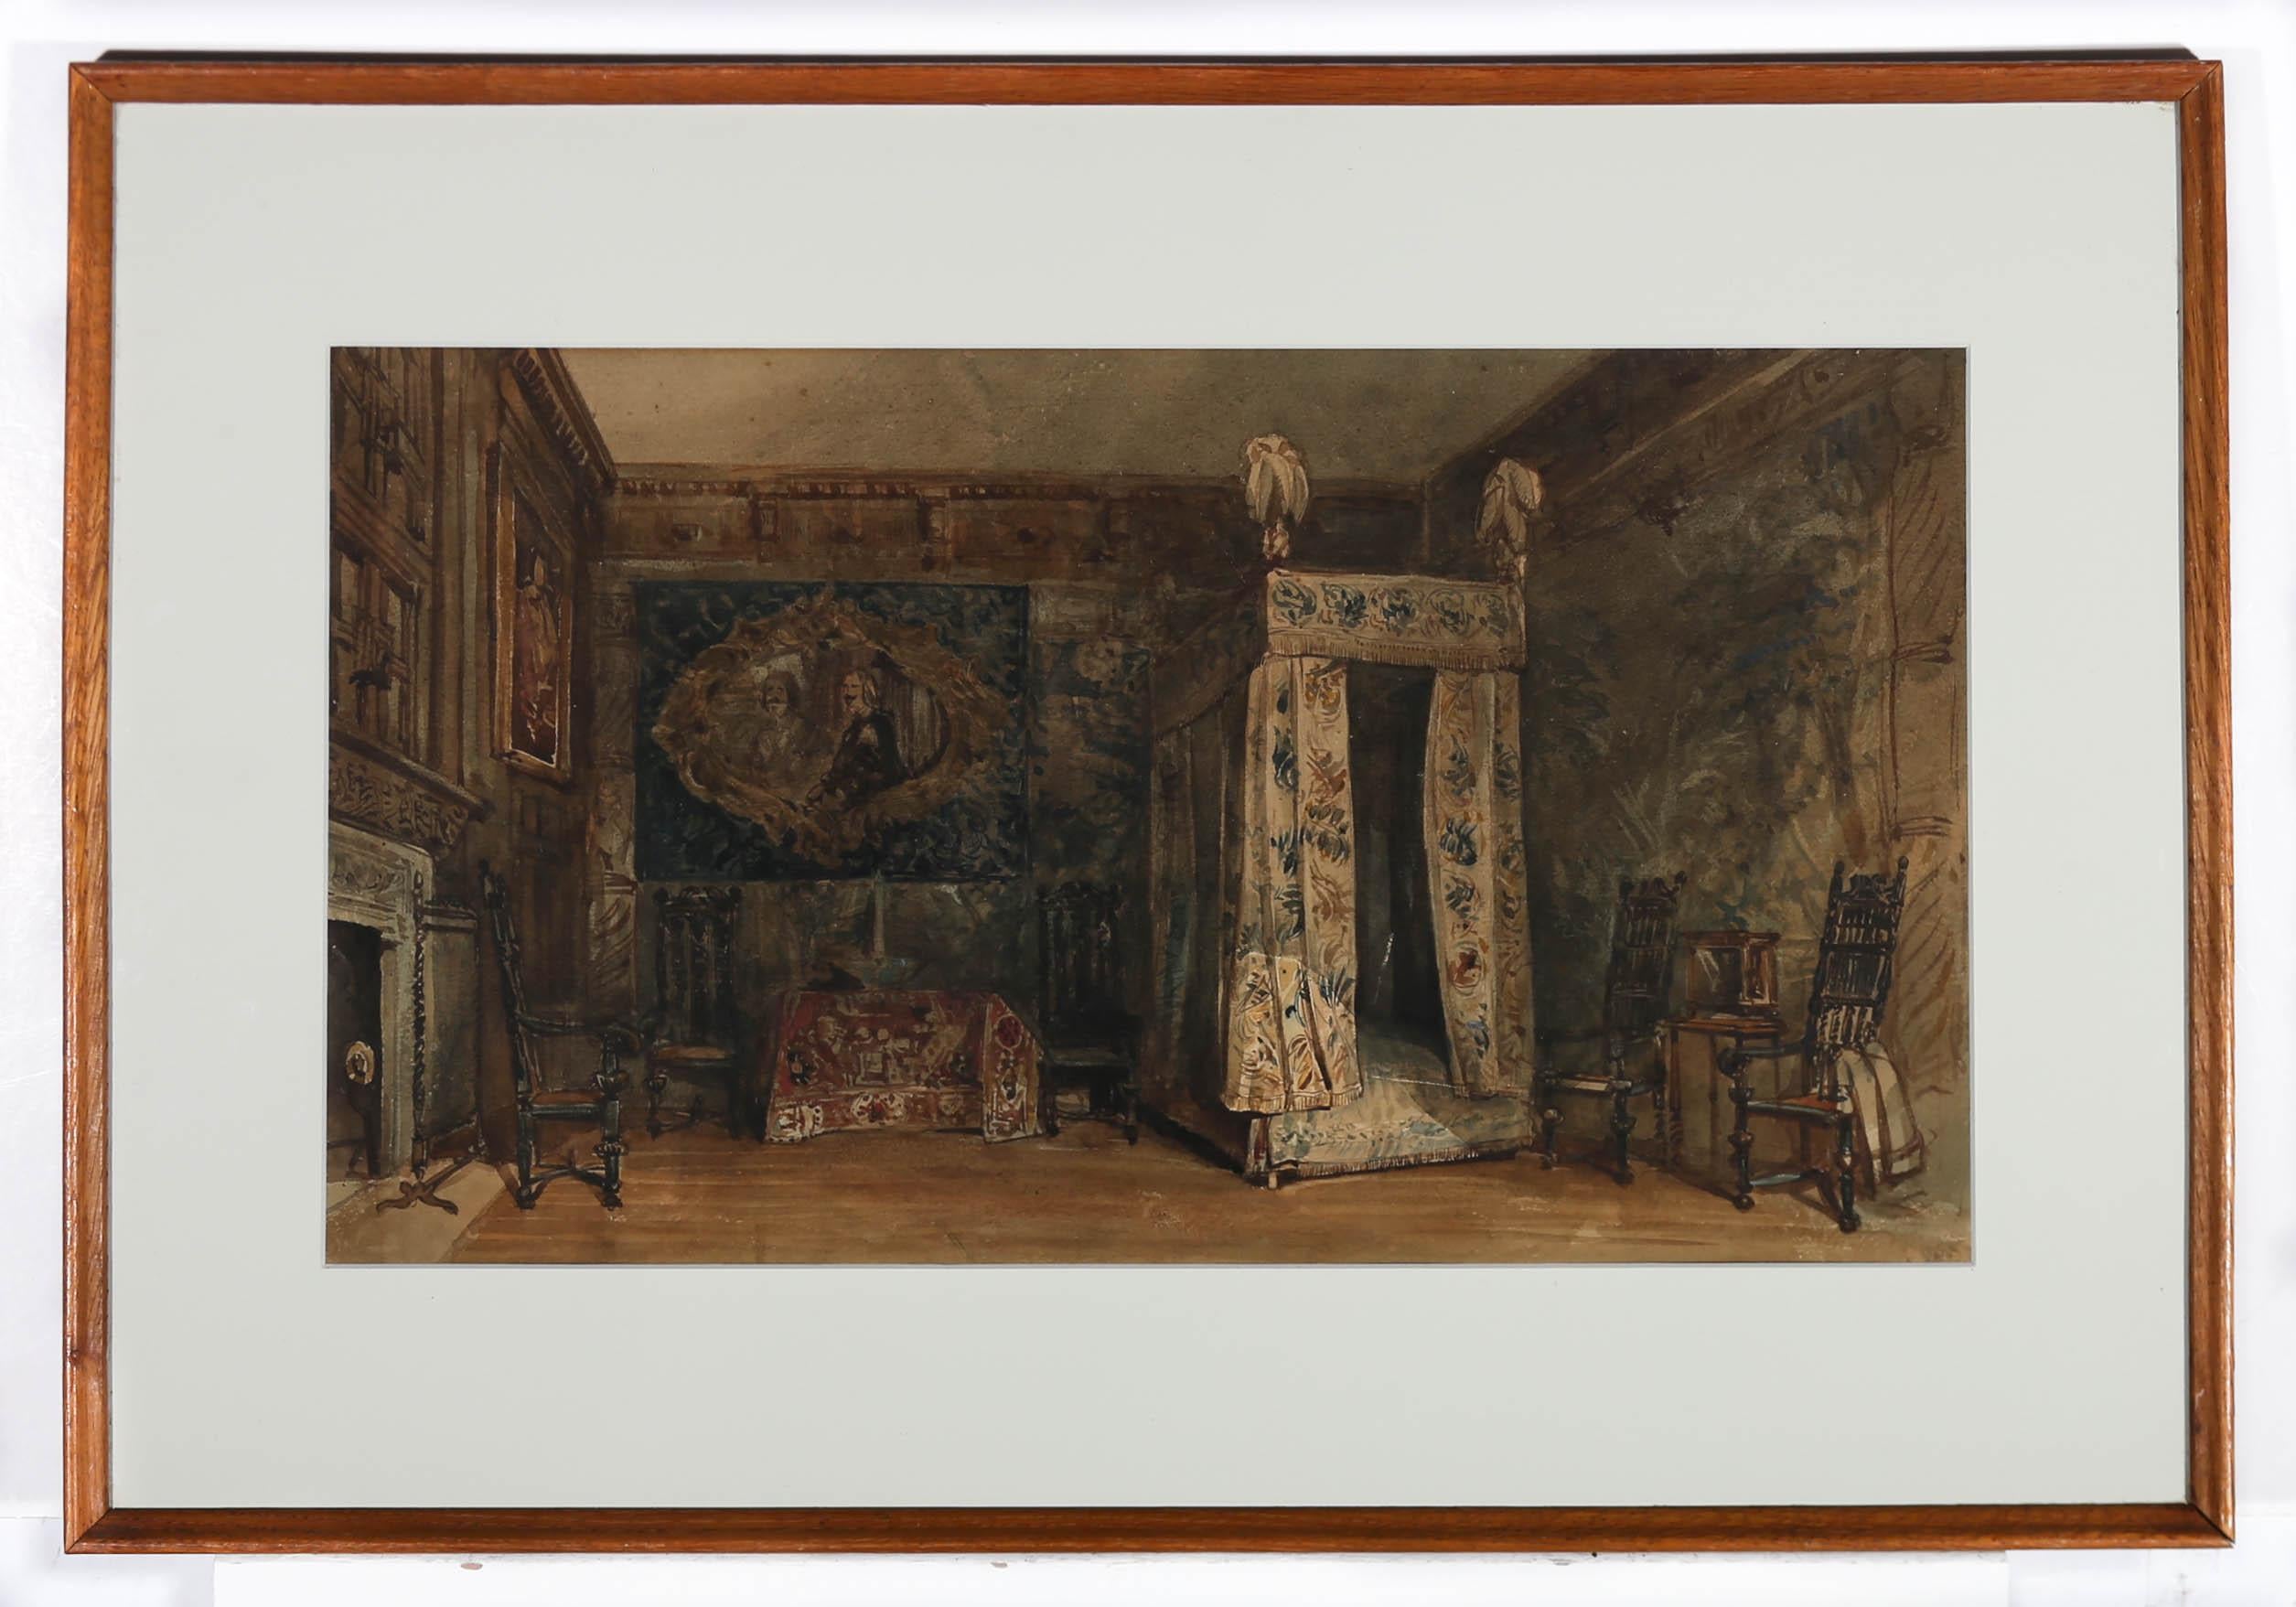 An exquisite watercolour study depicting the interior of a lavish Jacobean bedroom. The walls are adorned with tapestries covering the wood panelling and a grand four-poster bed sits snugly in the corner of the room. The light from the window